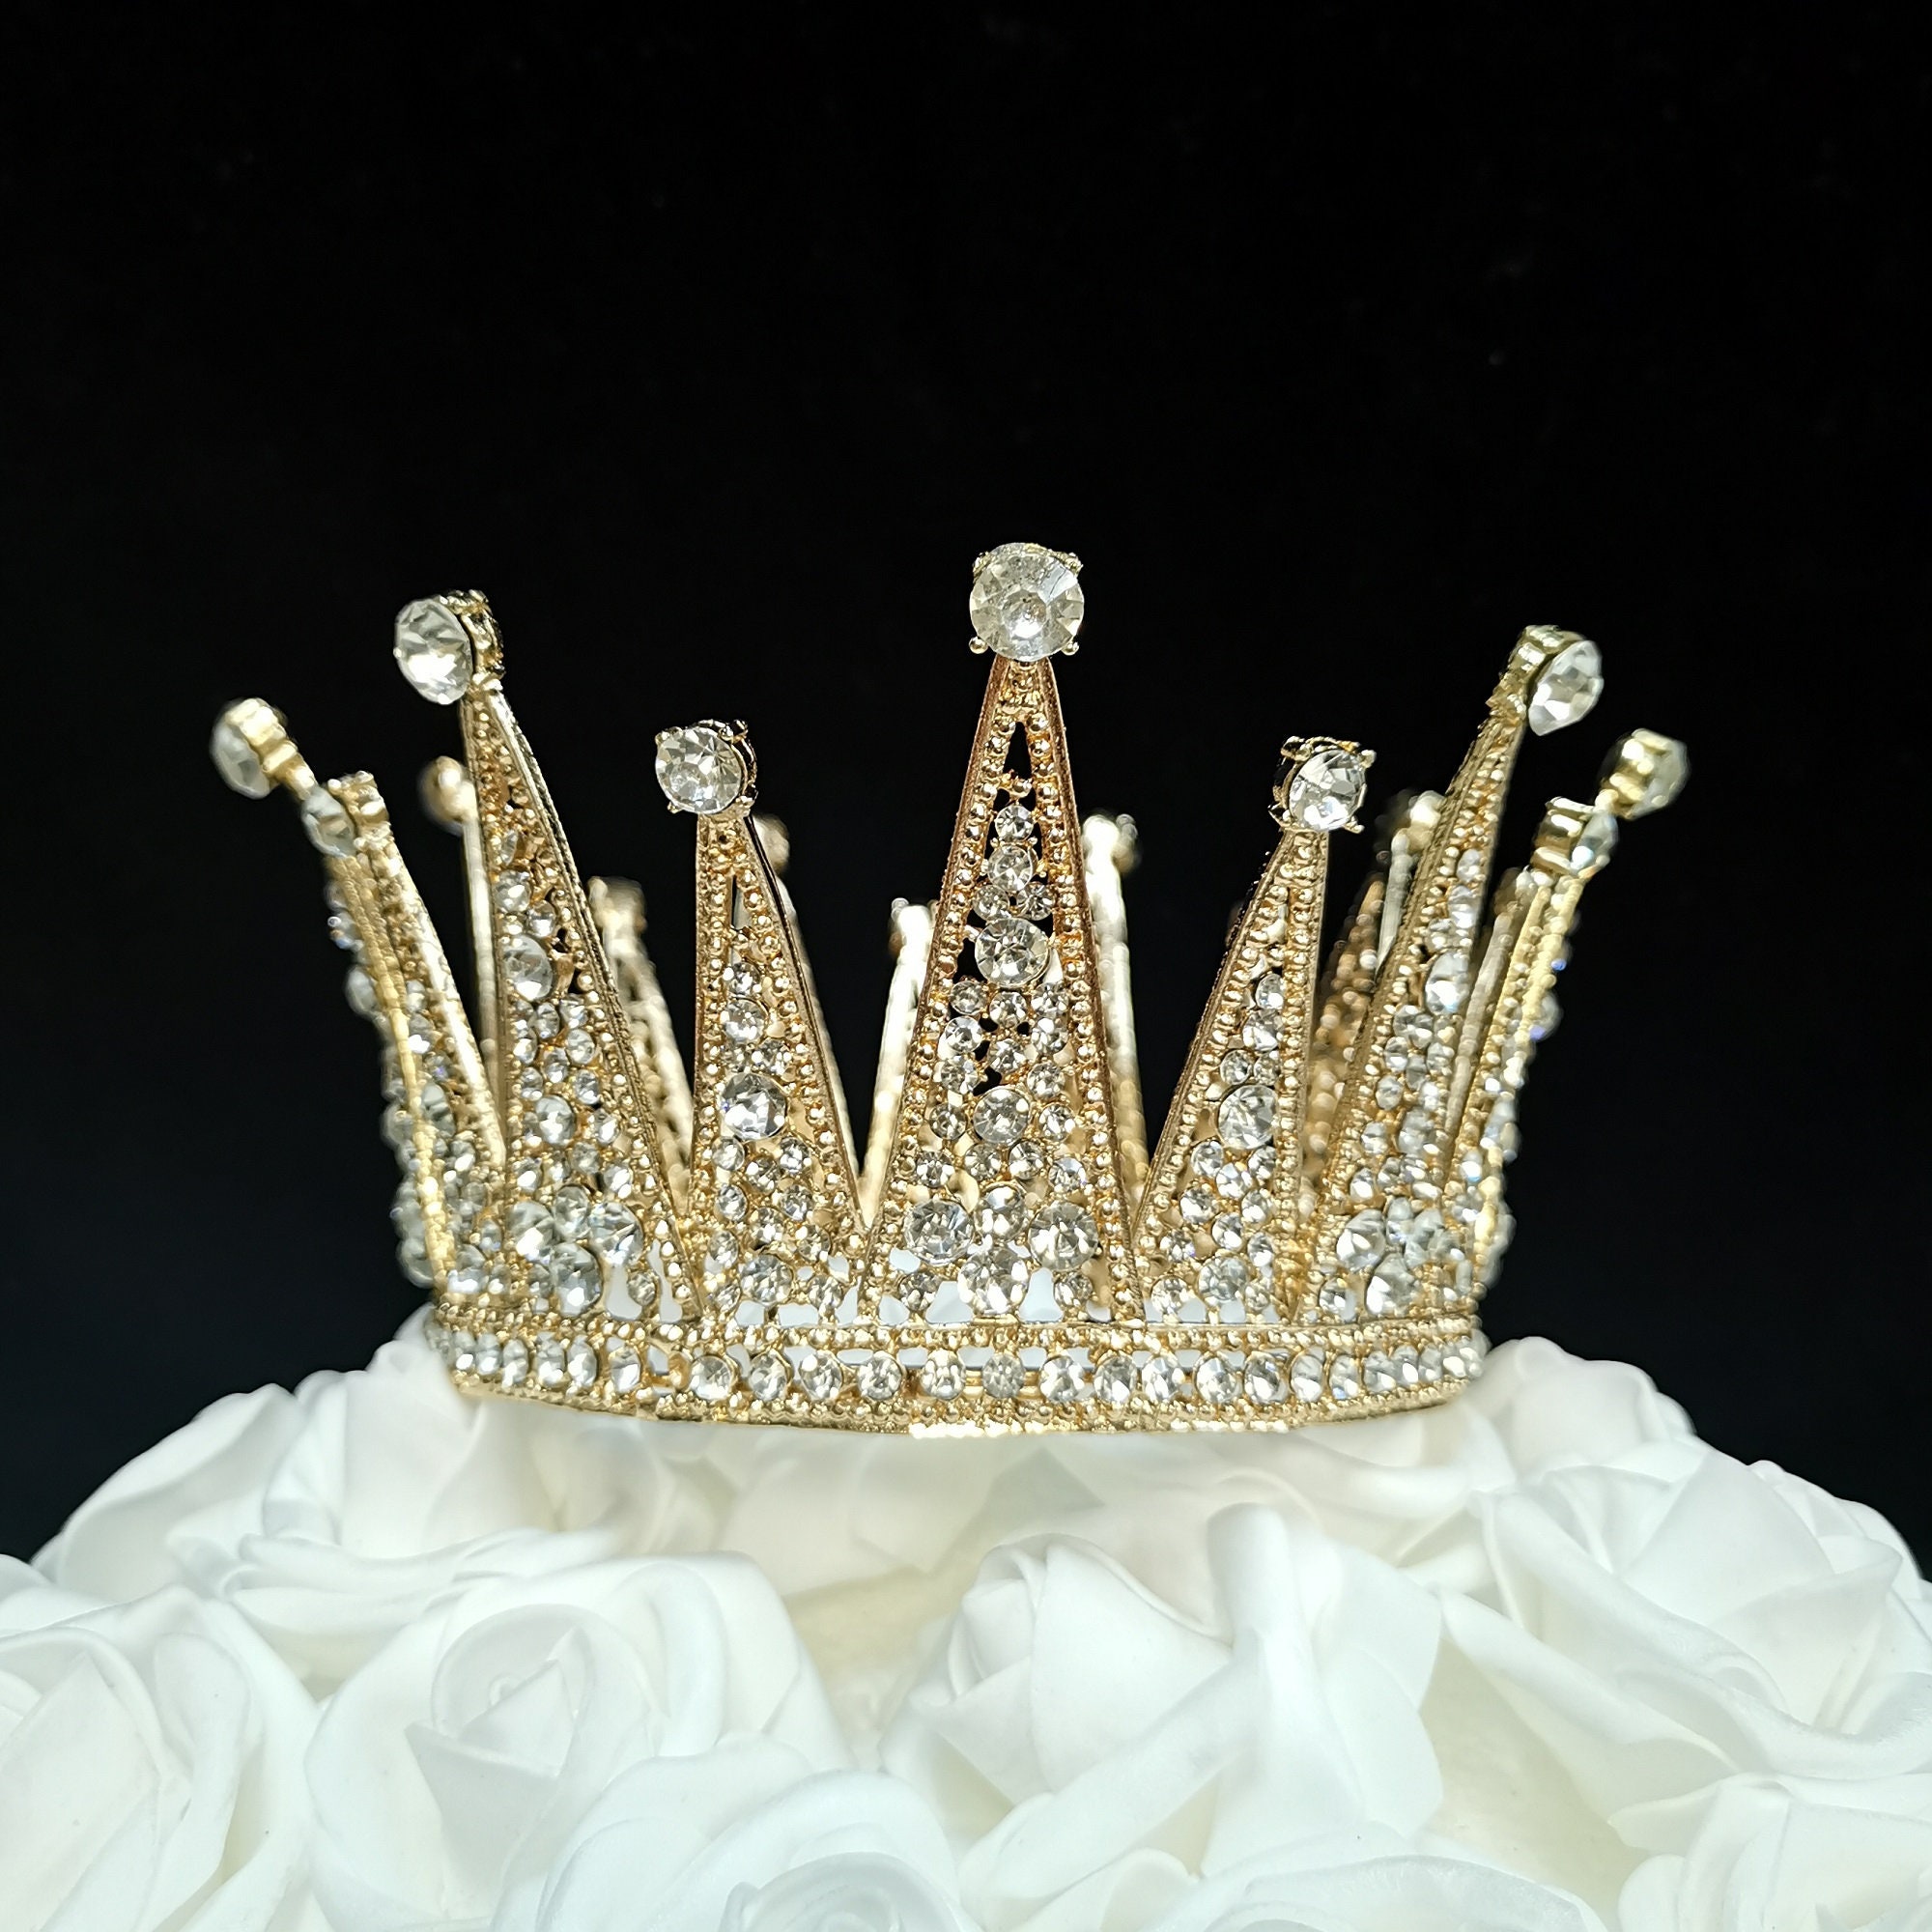 SisBroo Silver Crown Cake Topper, 6 Pieces Happy Birthday Cake Toppers,  Princess Crown Cake Decorations, Mini Crowns for Flower Arrangements